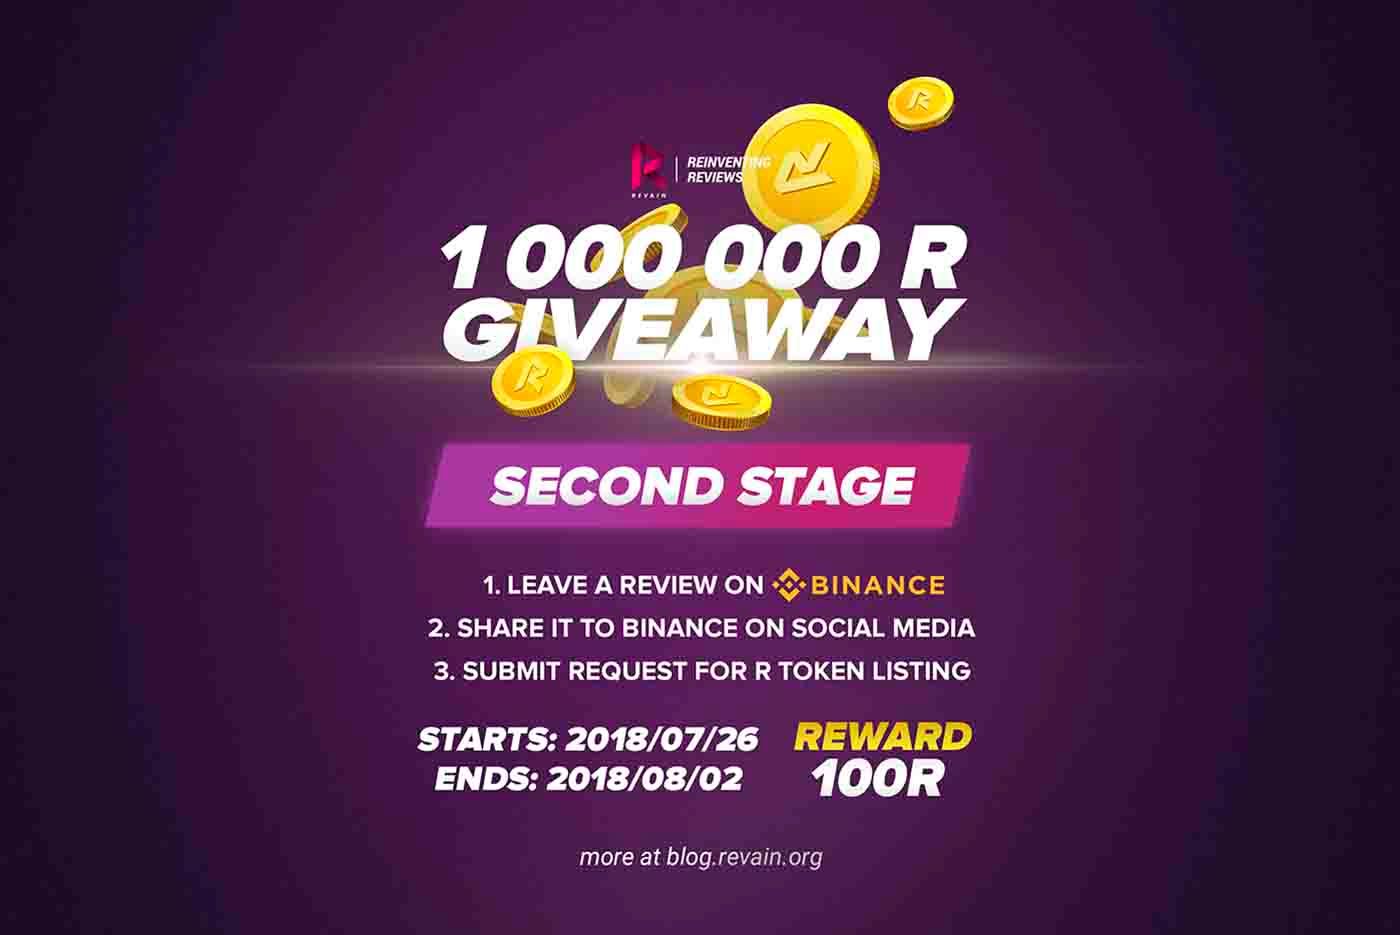 Article Revain is launching giveaway with a 1 000 000 R tokens total award